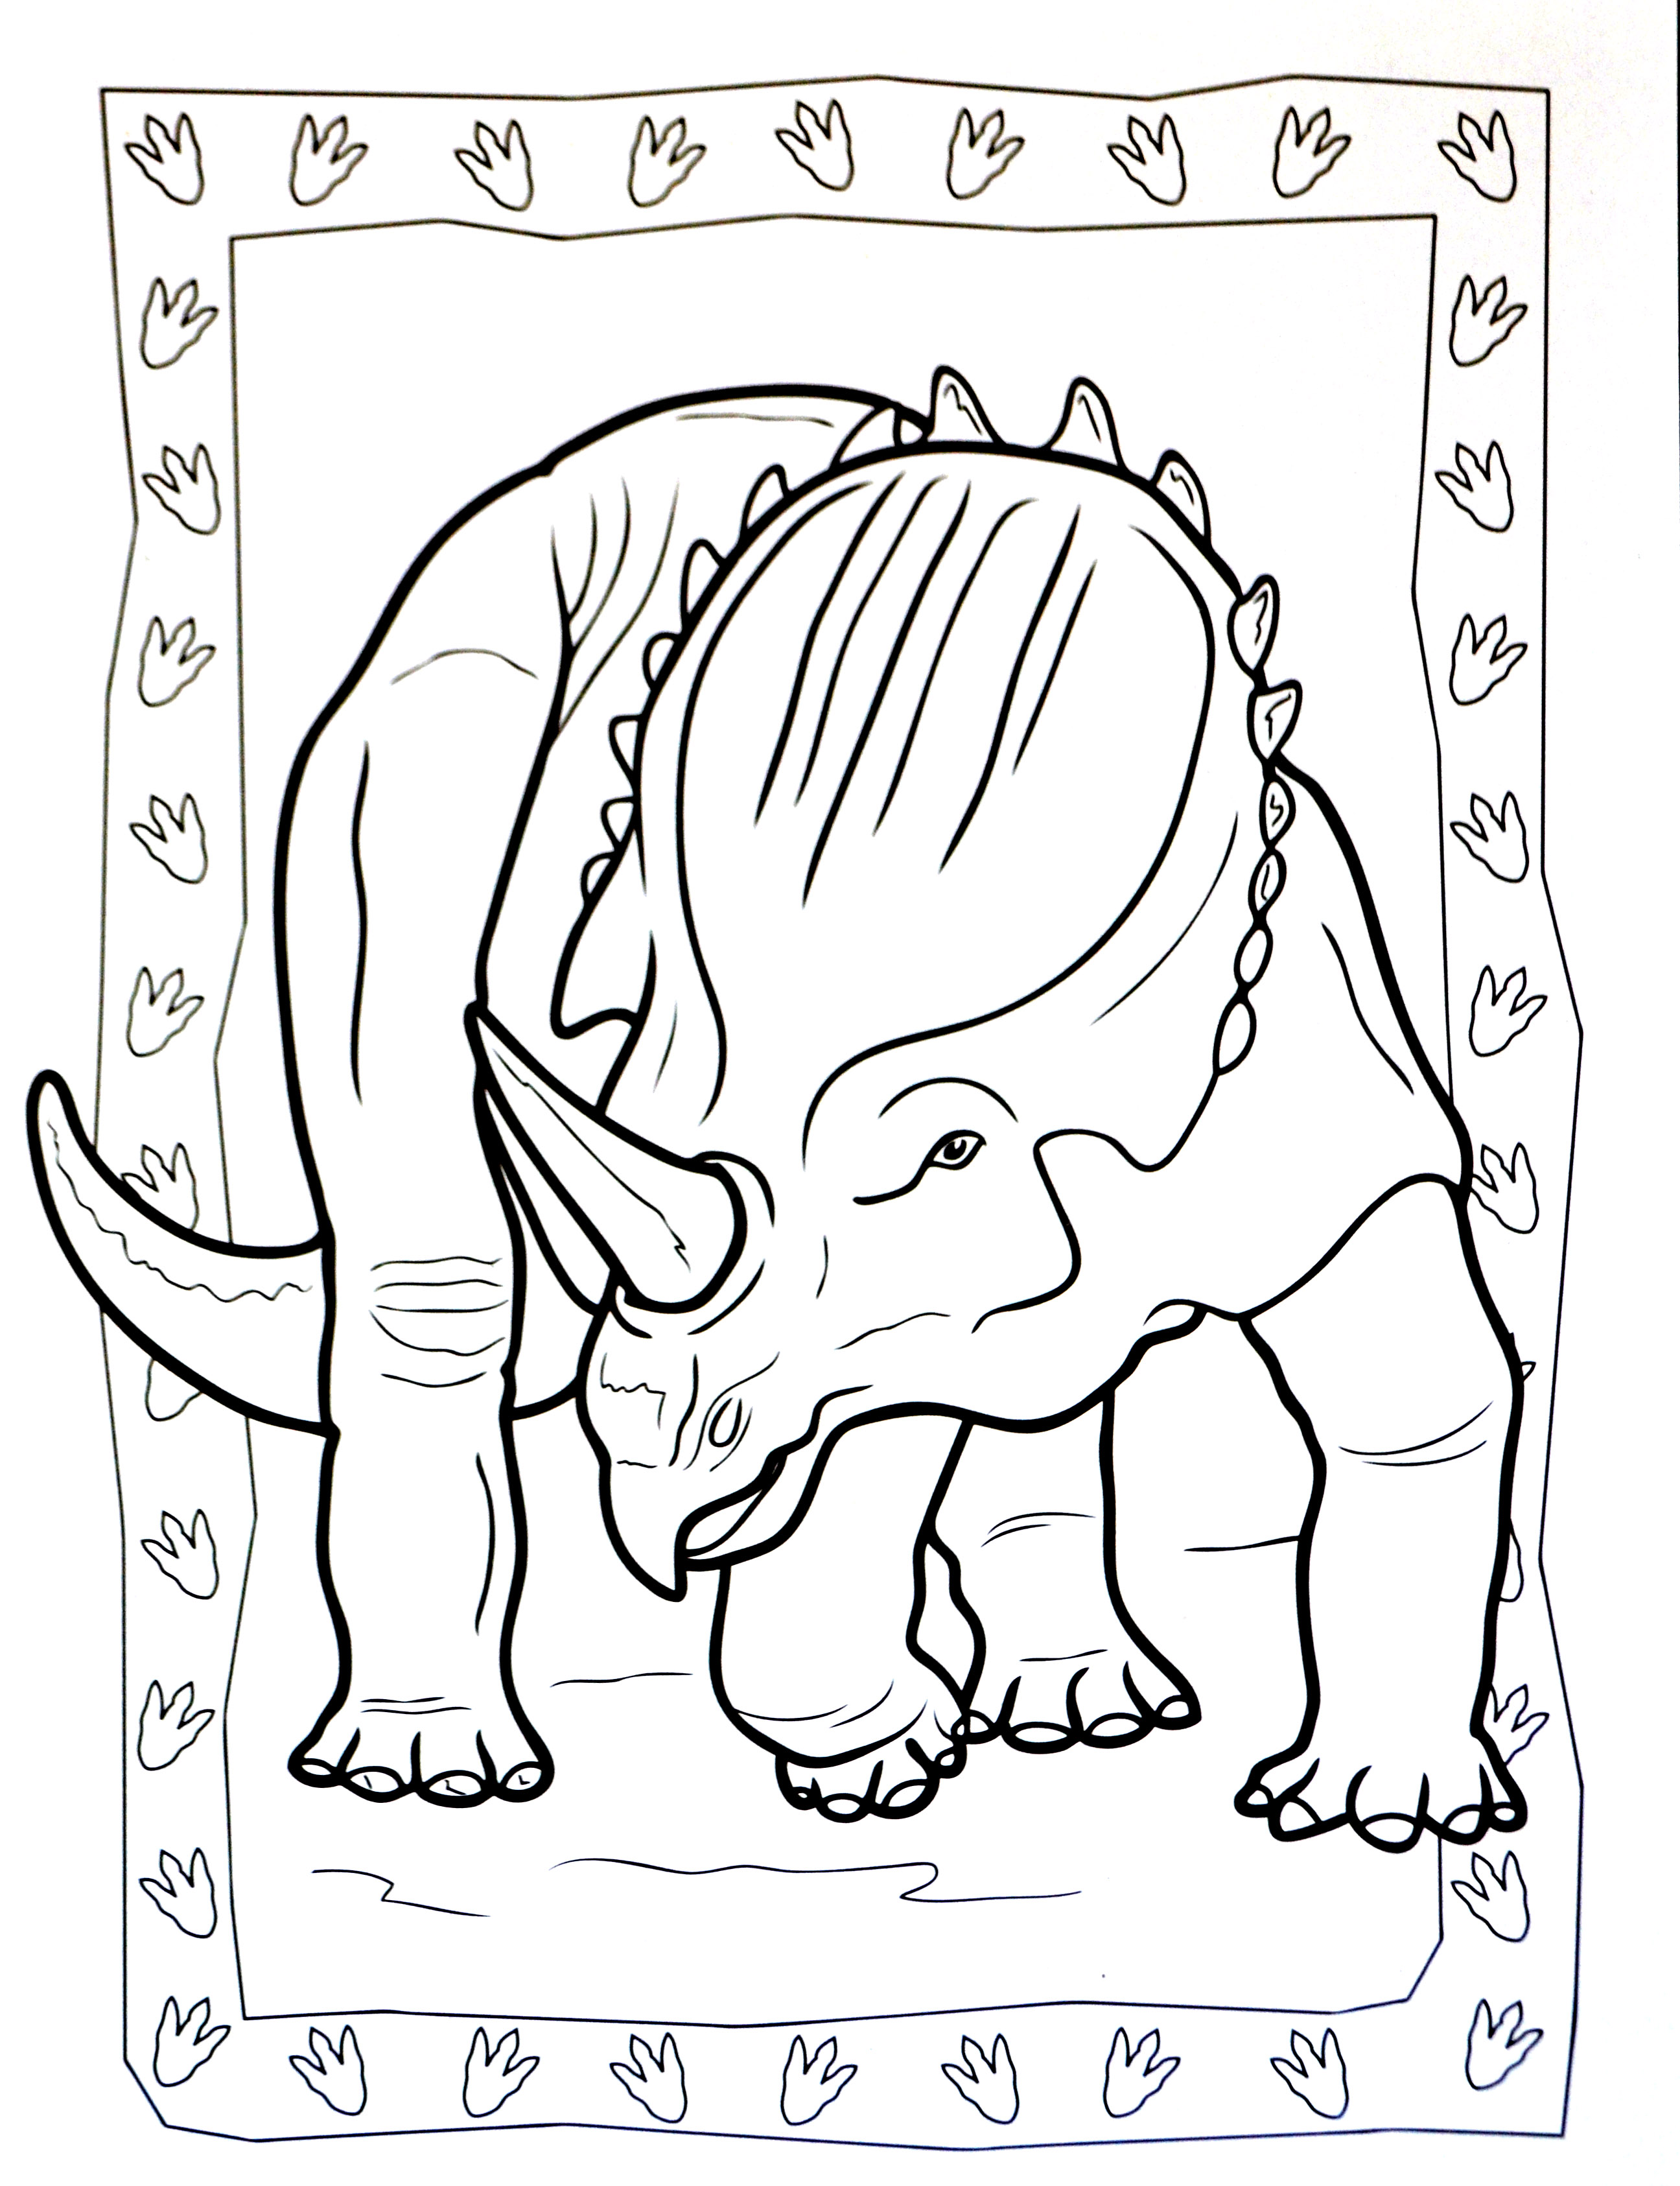 Triceratops to print and color